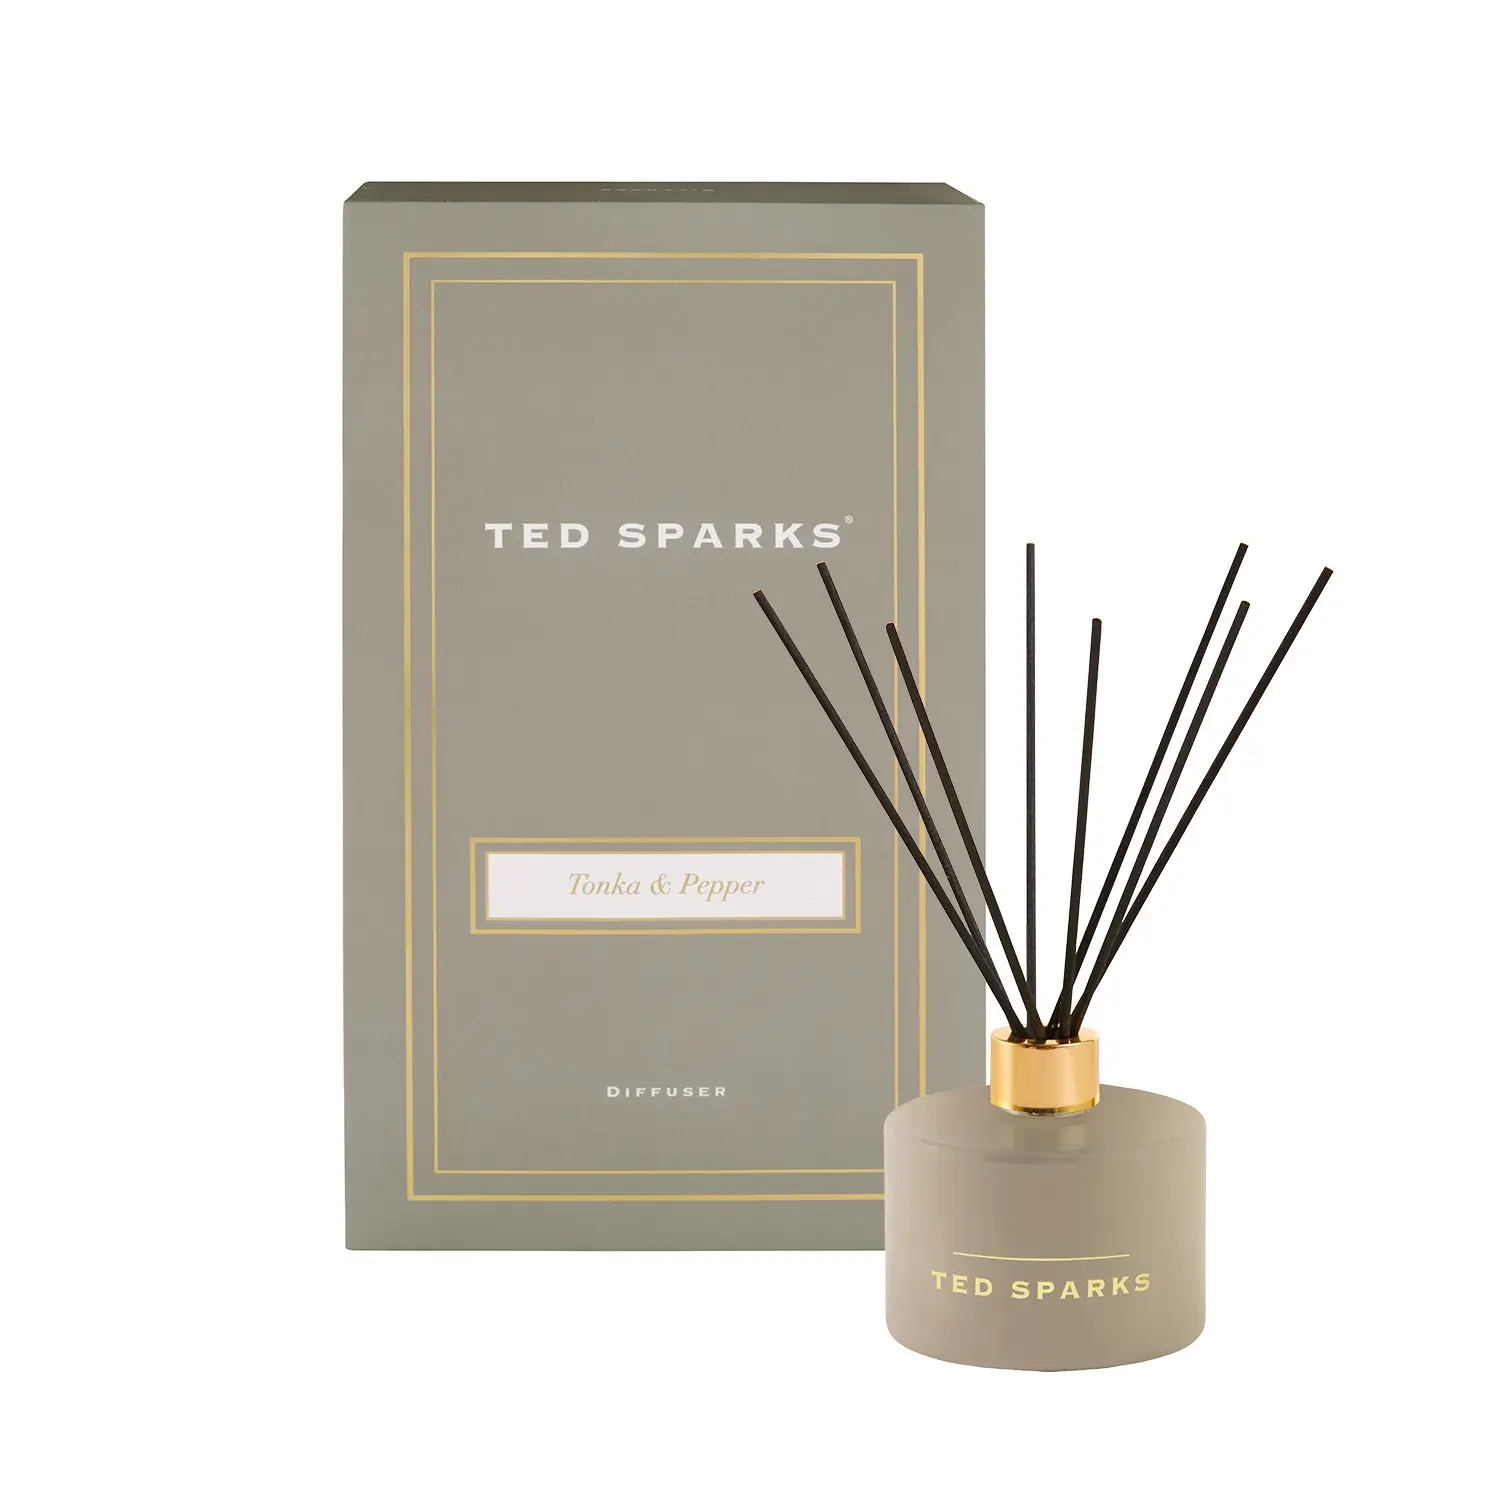 Ted Sparks - Duftst盲bchen Diffuser -